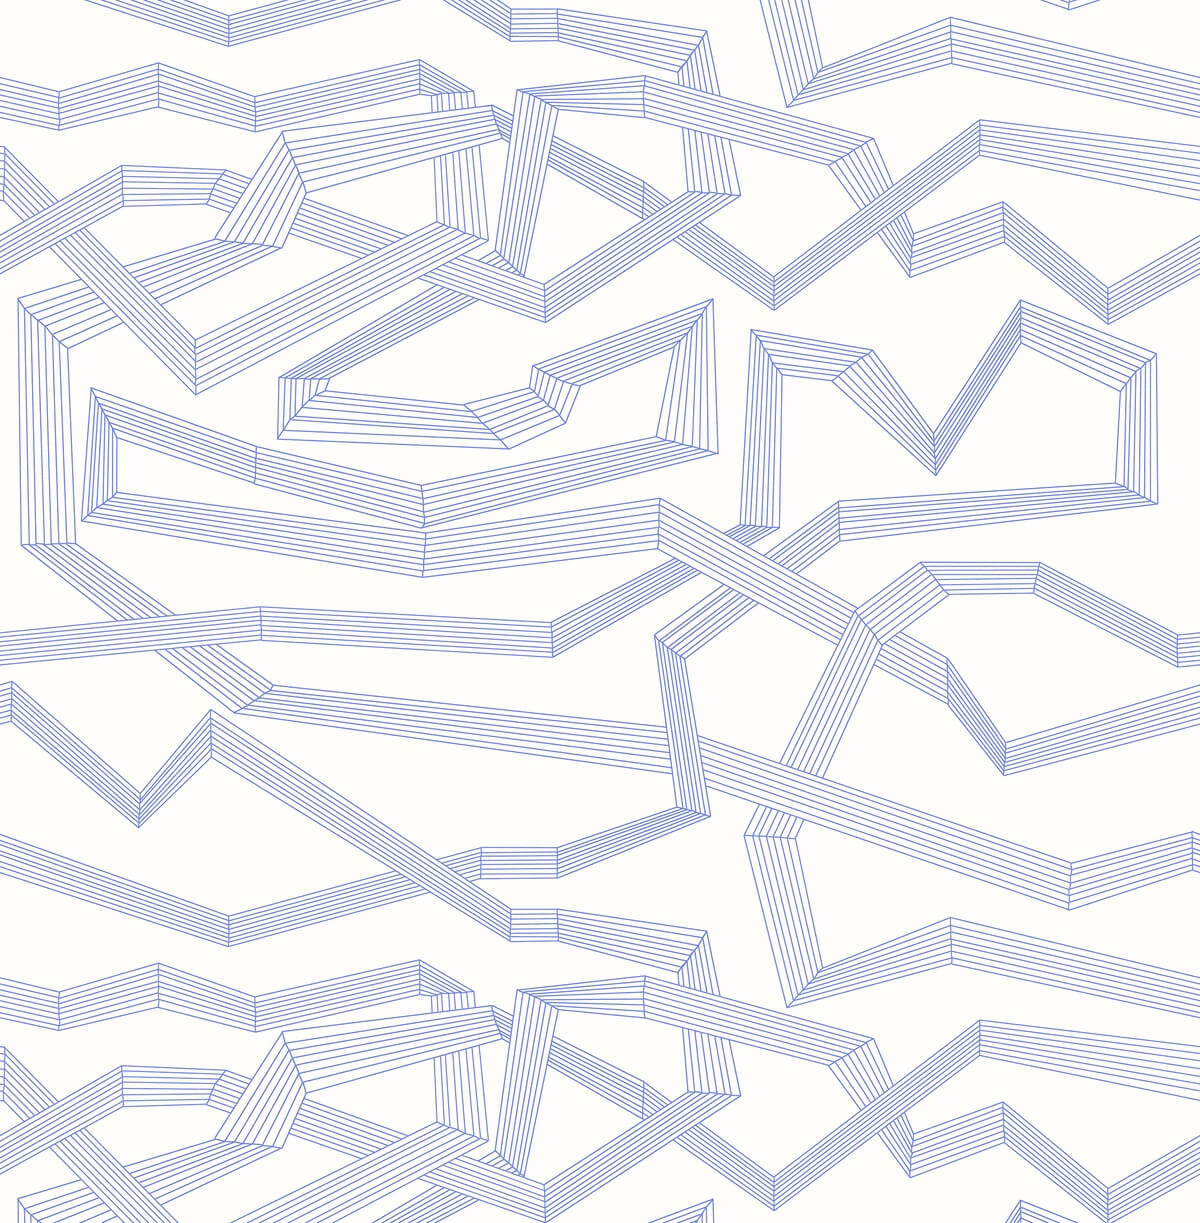 Boomerang pattern in blue with white background